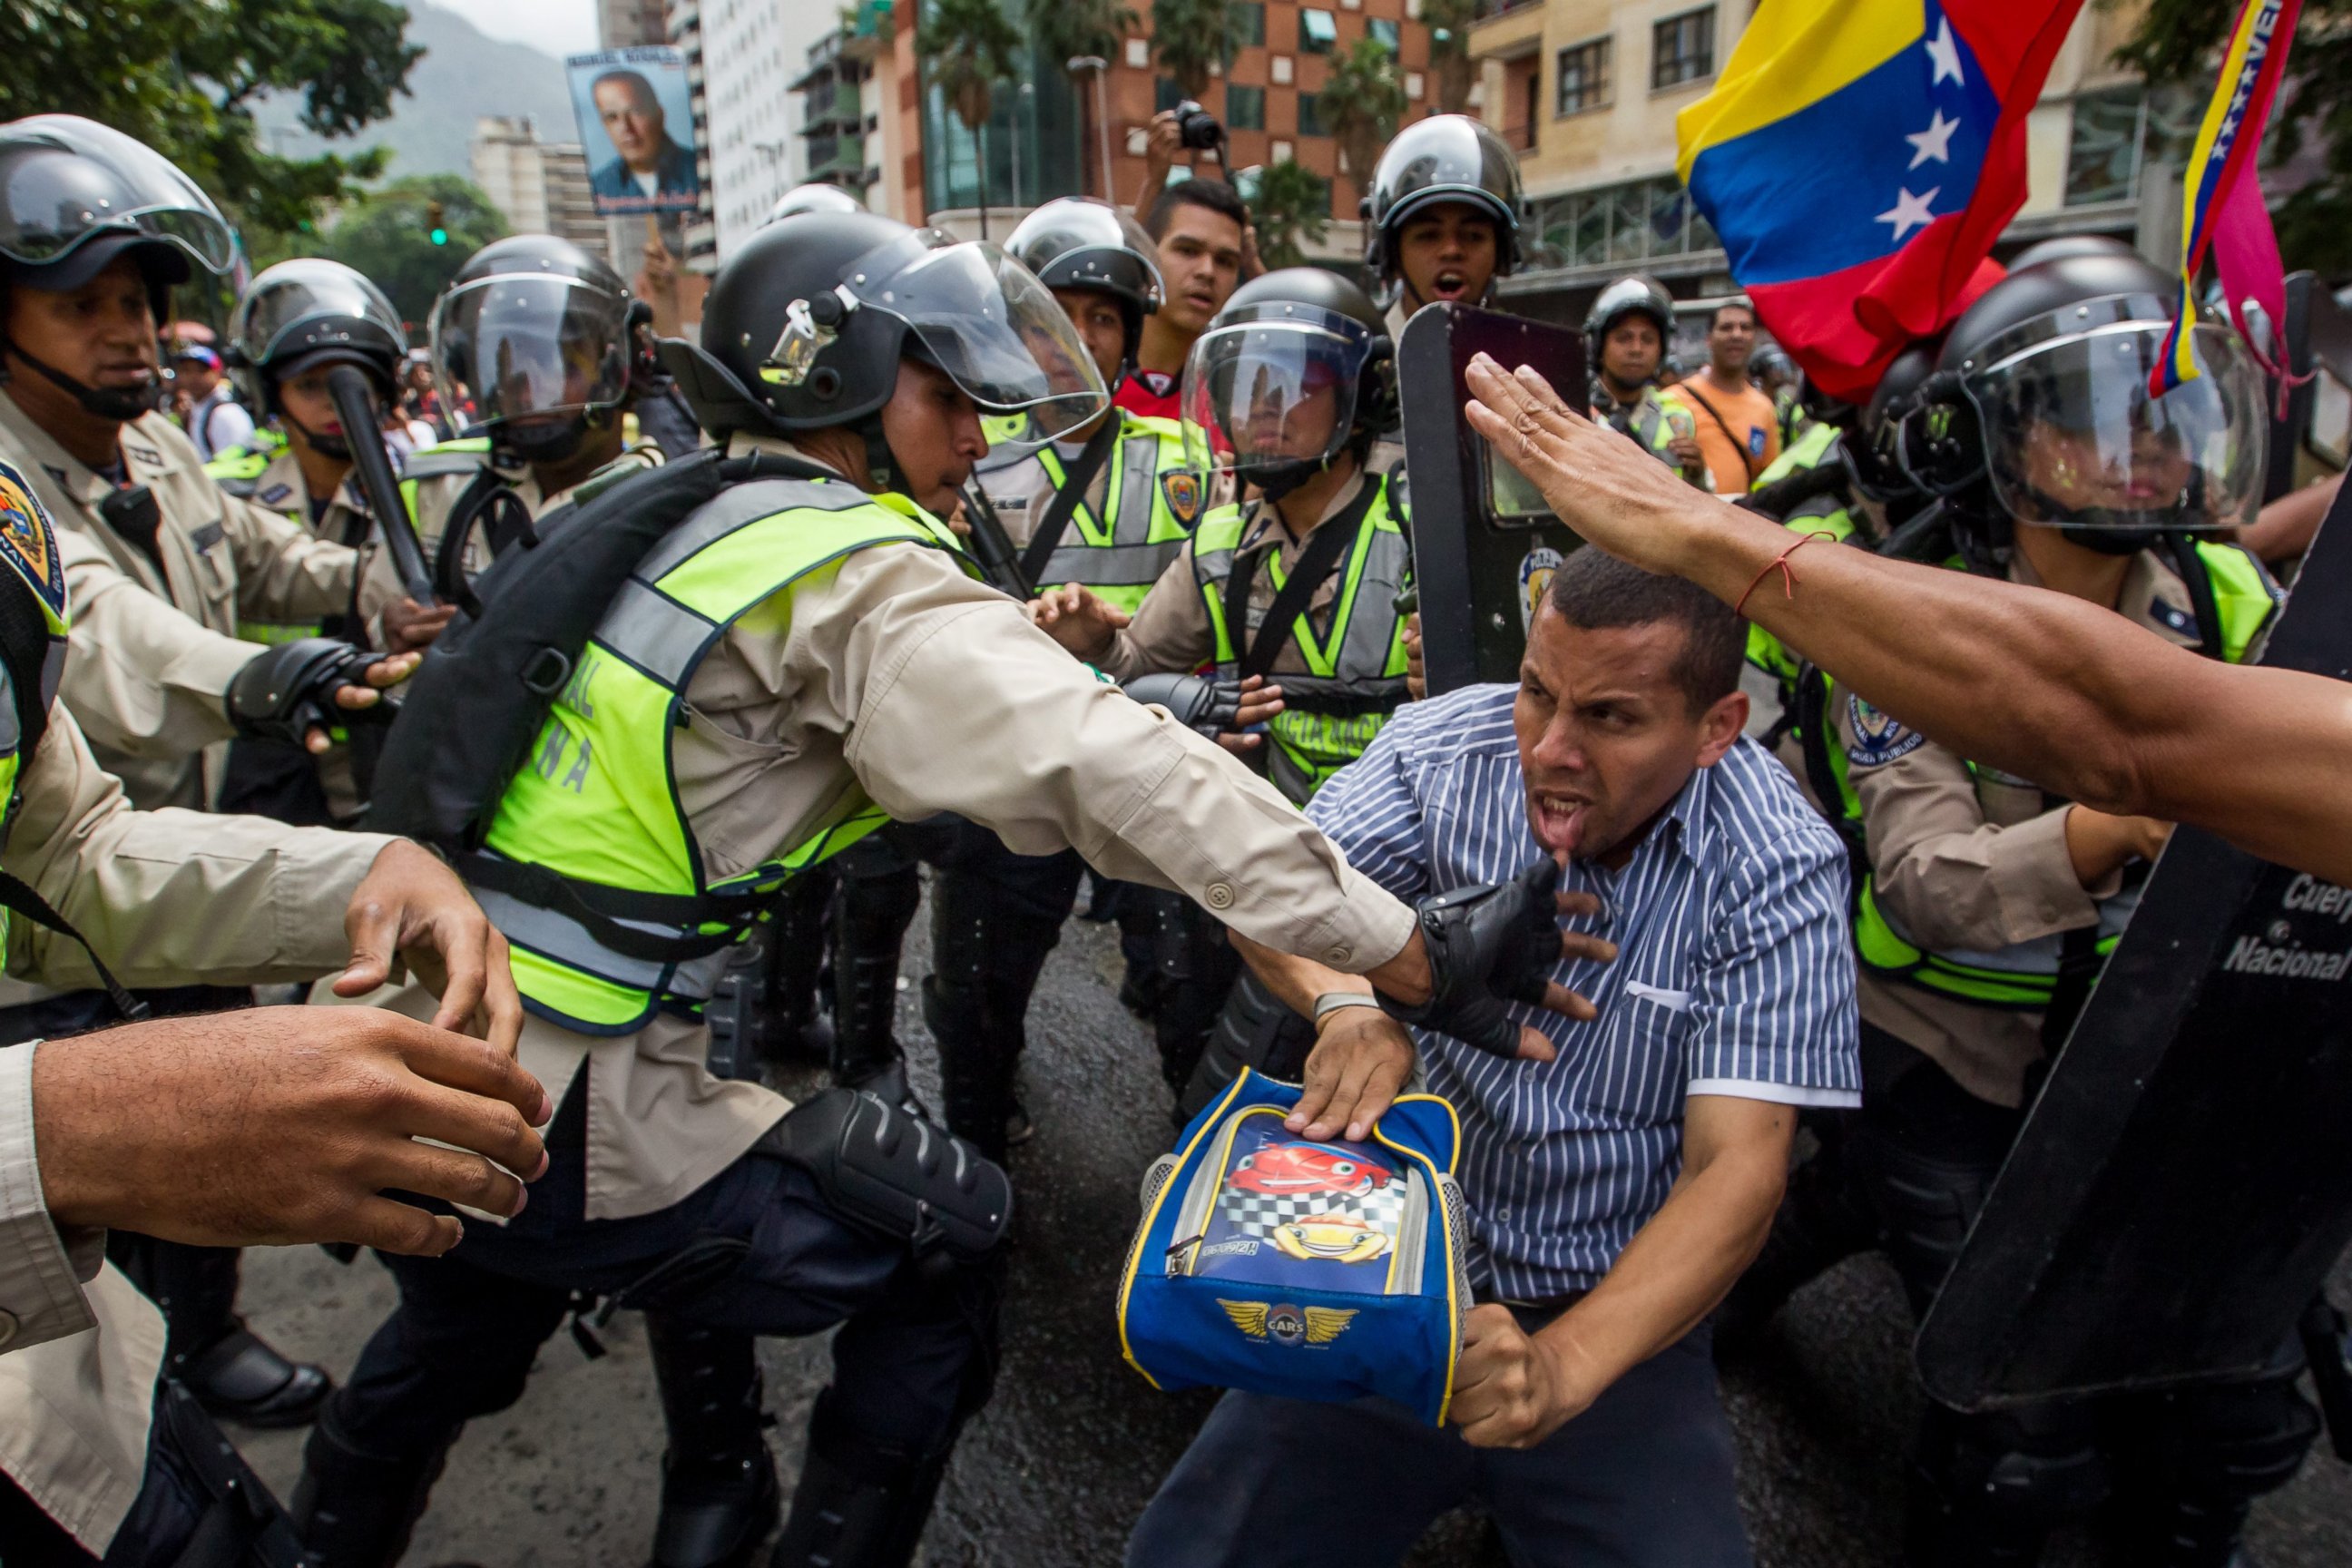 PHOTO: Demonstrators clash with police during a protest against Venezuelan President Nicolas Maduro's Government in Caracas, Venezuela, May 18, 2016.